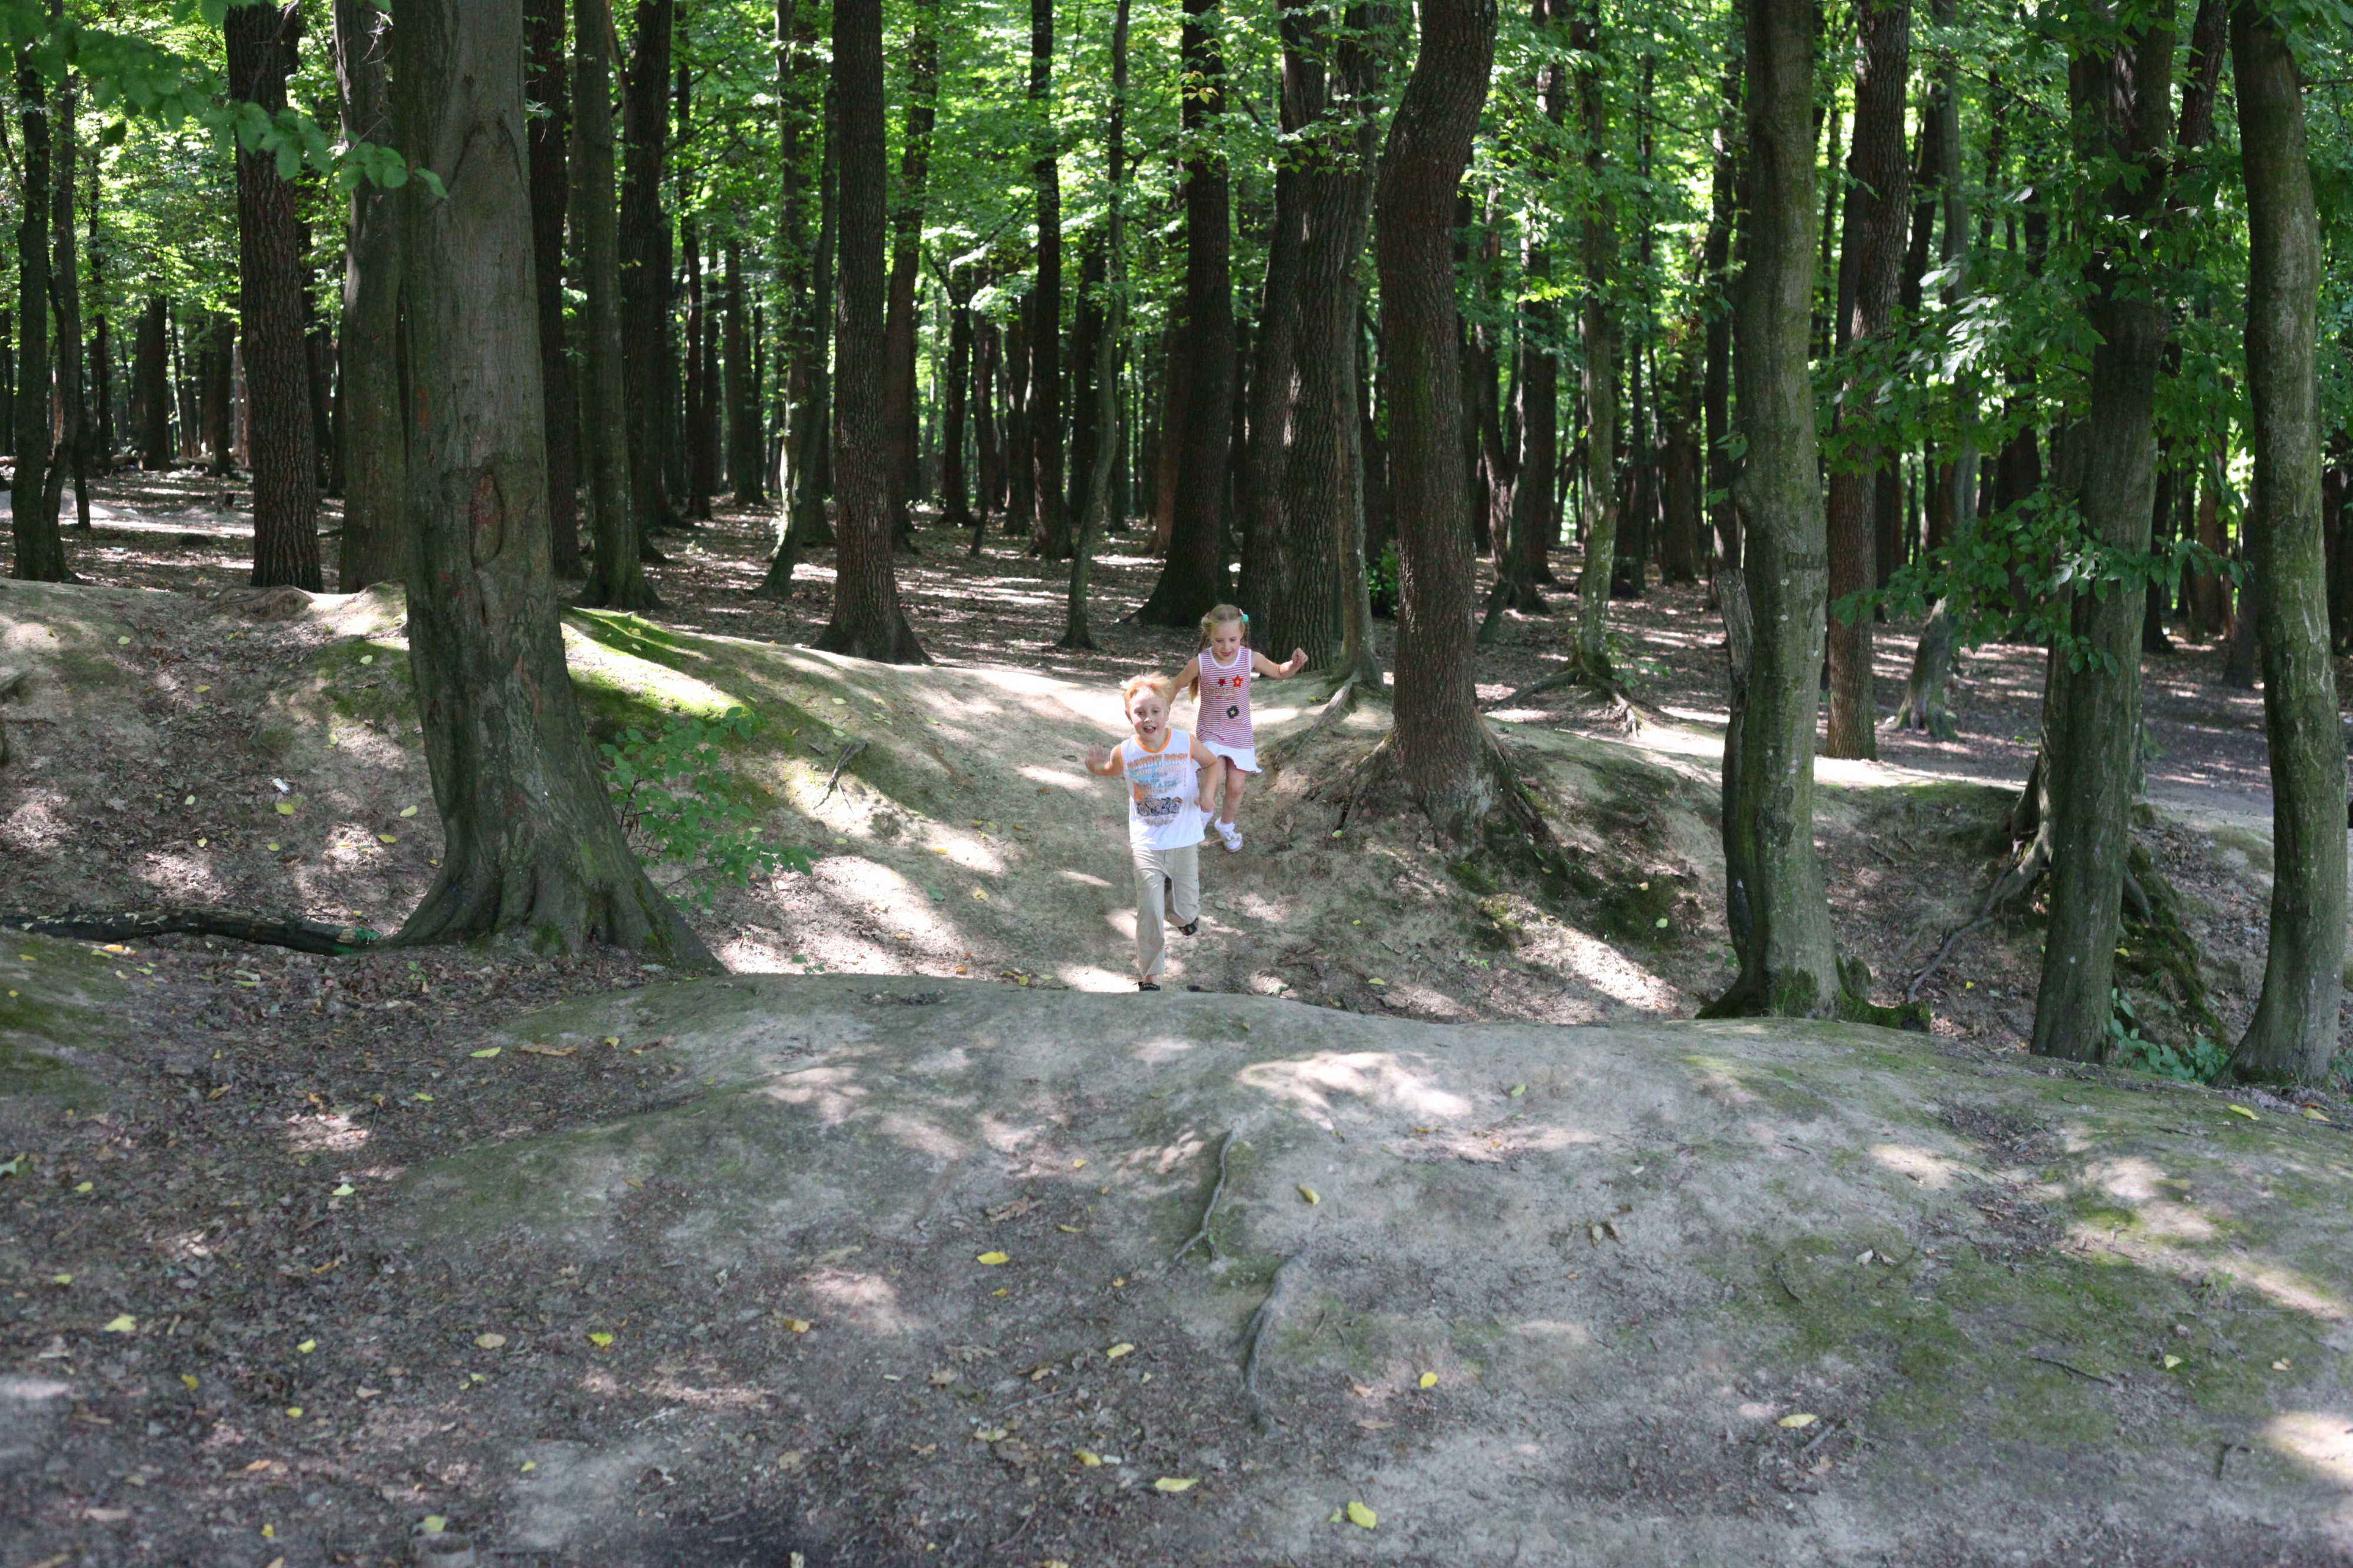 Kids running in a forest